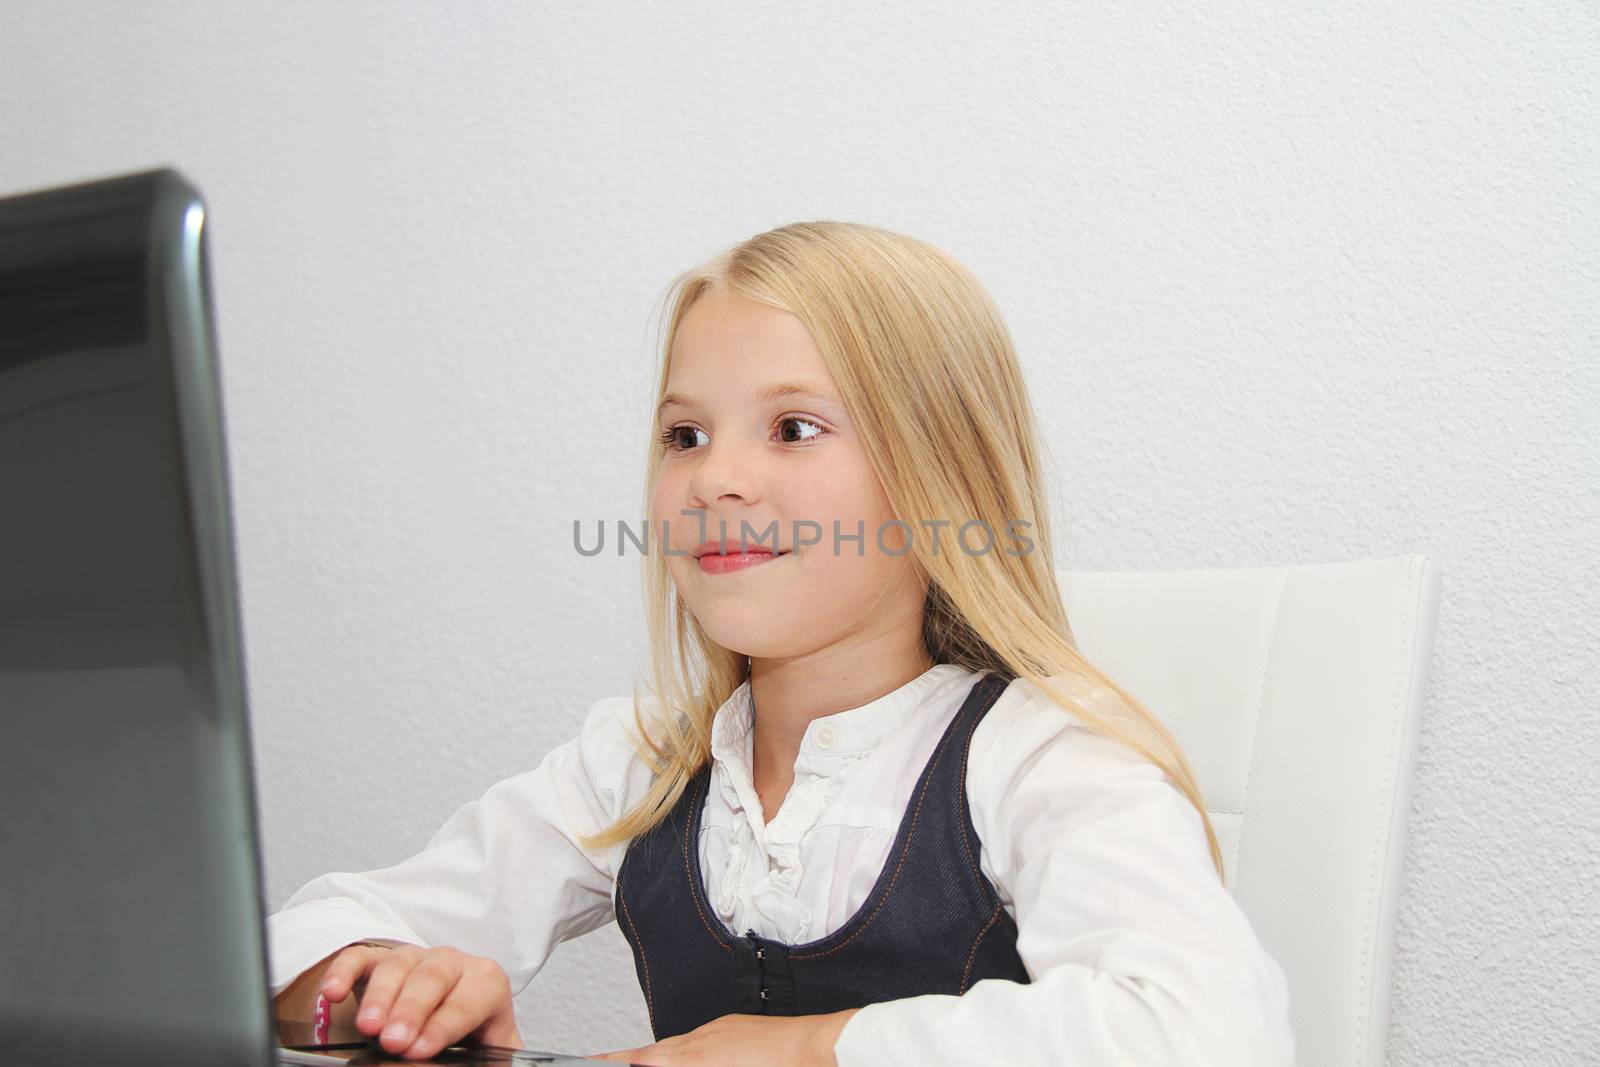 Young Girl Using Laptop At Home